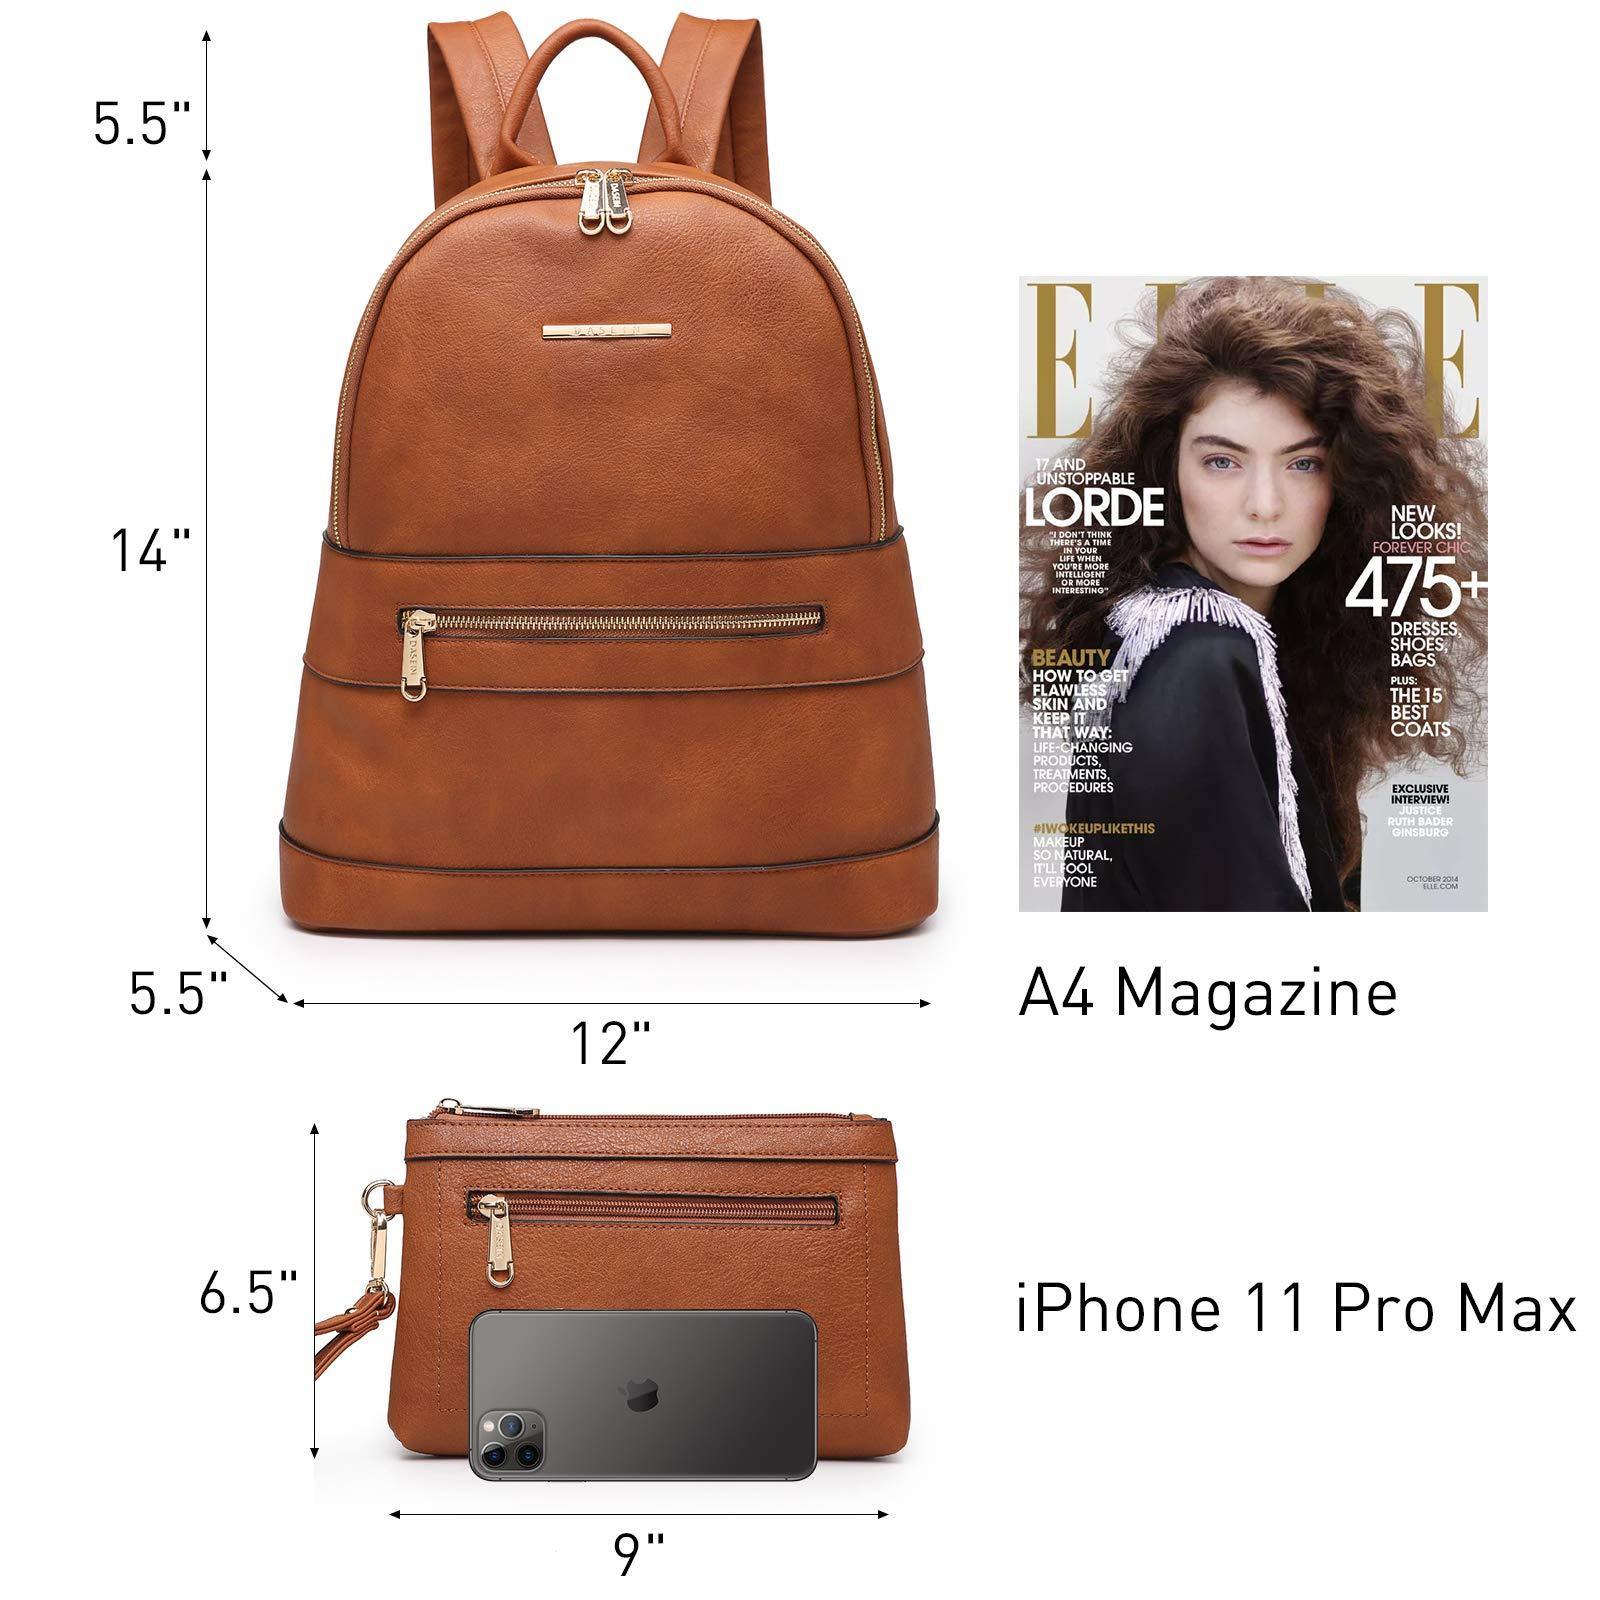 CLN Delaiah Backpack, Women's Fashion, Bags & Wallets, Backpacks on  Carousell